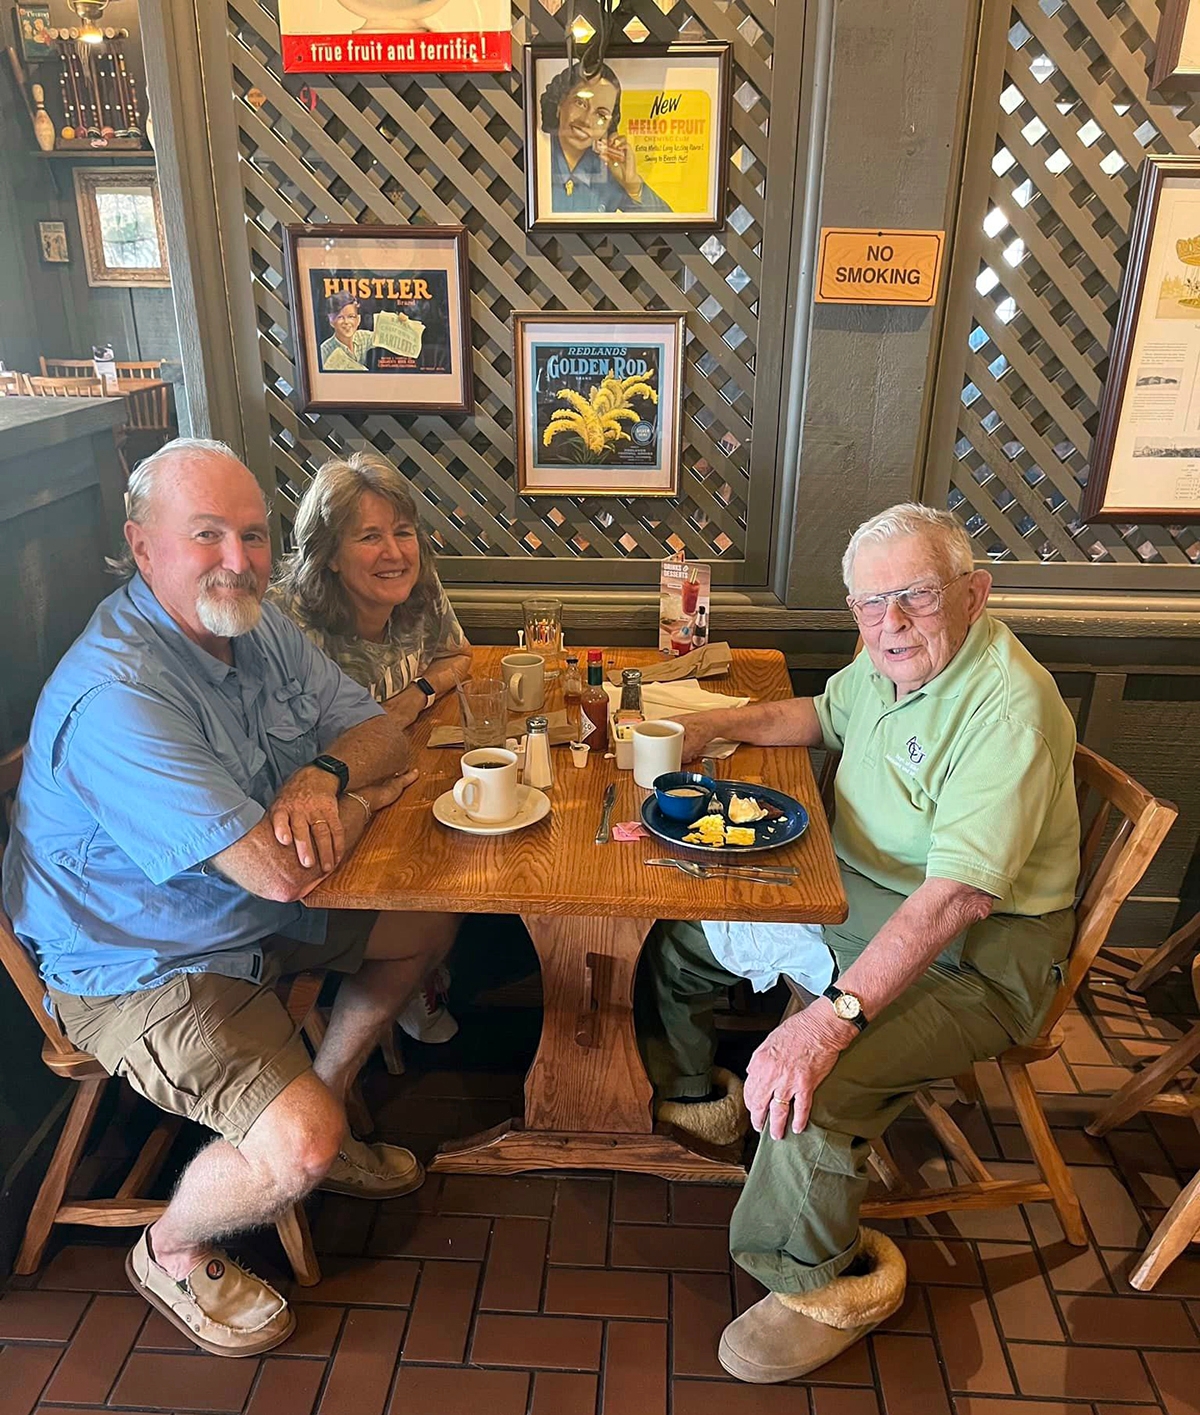 Dr. Willis always had time to visit with students, or in this case parents of former students, at the local Cracker Barrel. Phyllis and Mike Ricker saw him dining alone about a year ago and invited him to their table. “I had known of Dr. Willis for years, but I didn't know him personally,” Mike recalled. “I reminded him of our youngest daughter Robin Whitmire and how he called her his ‘Robin Bird.’ That was a special morning; we both left that table feeling better about just being alive with men like him amongst us.”